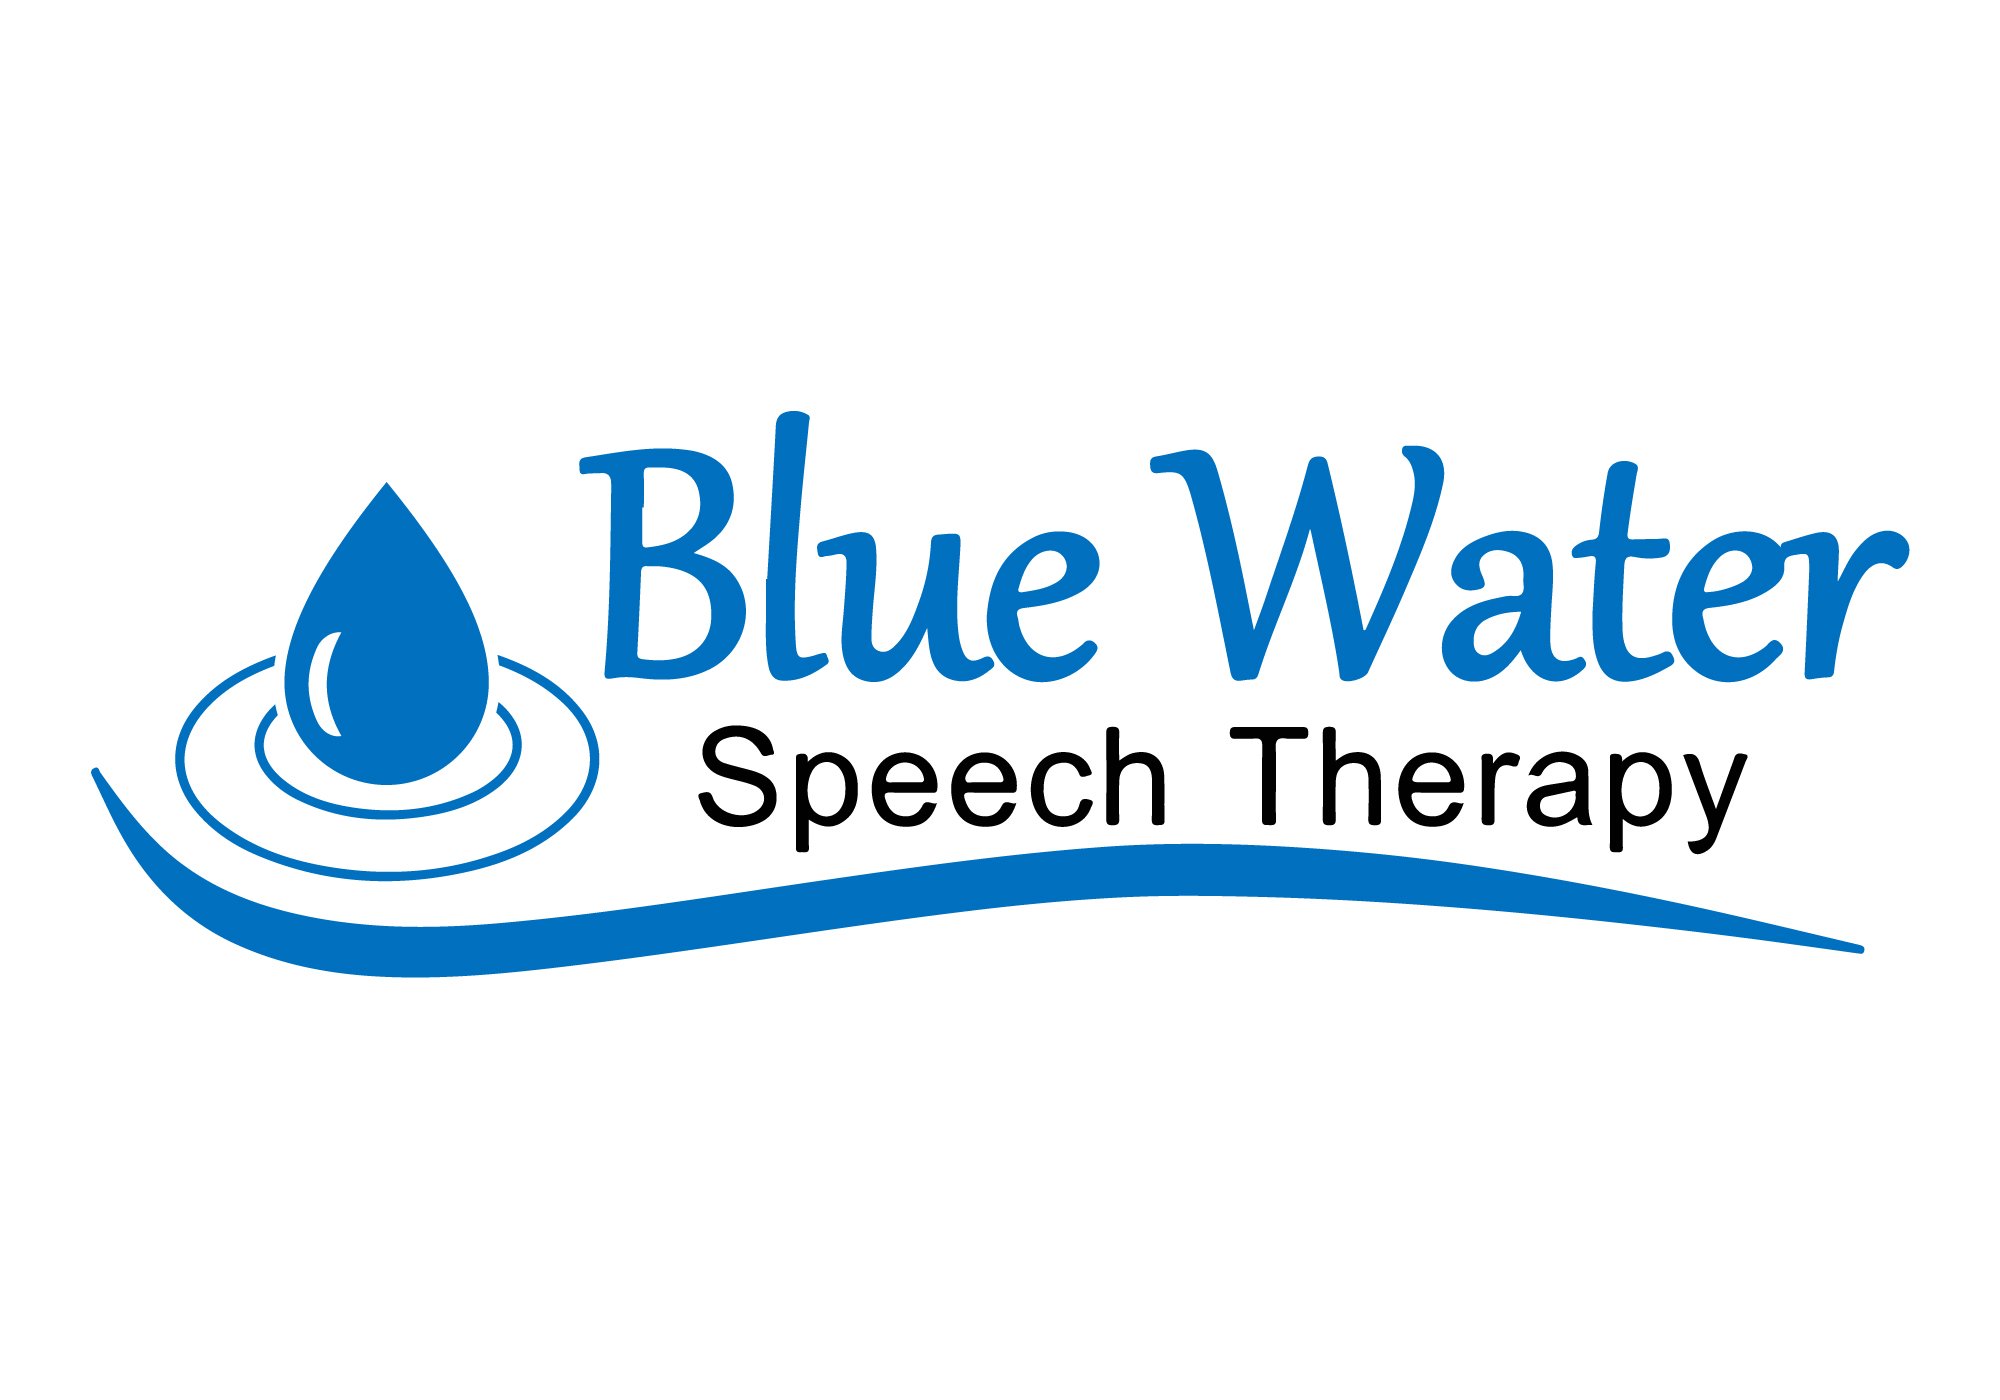 Blue Water Speech Therapy